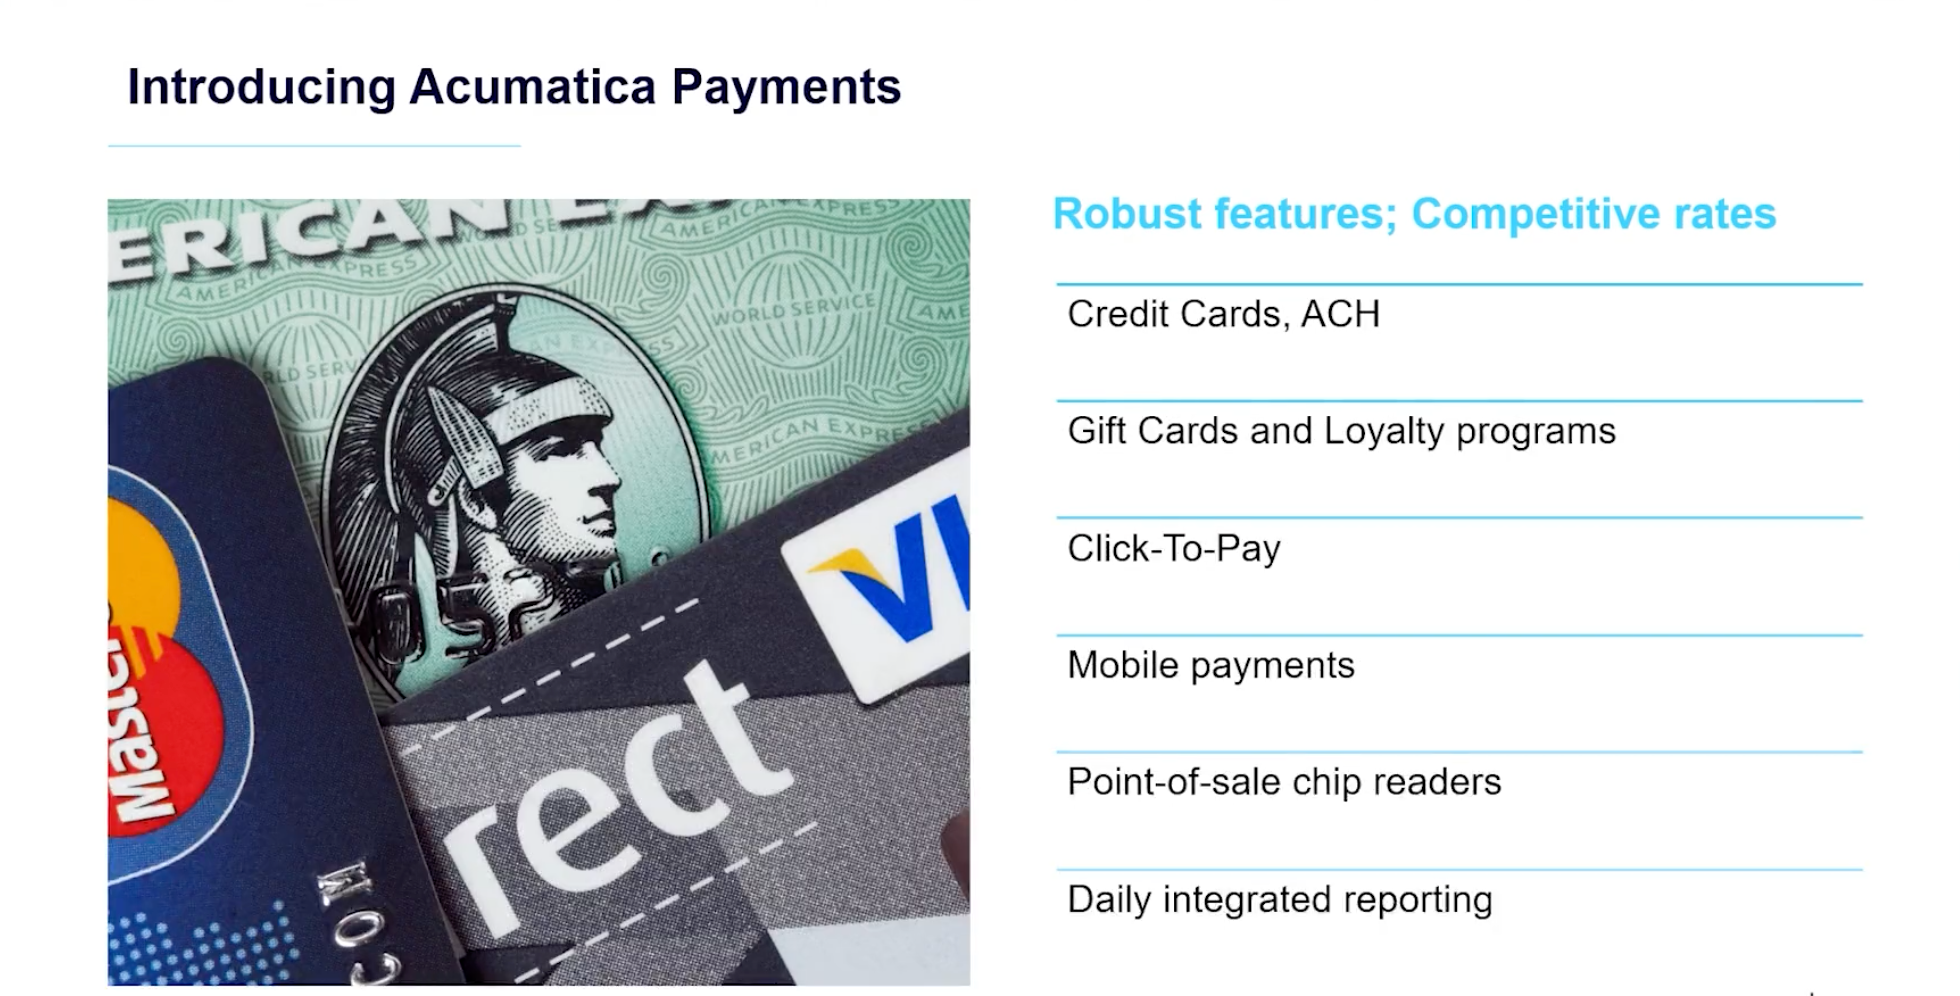 Acumatica ERP payments: credit cards, ACH, Click-To-Pay, Mobile payments, Point-of-Sale chip readers